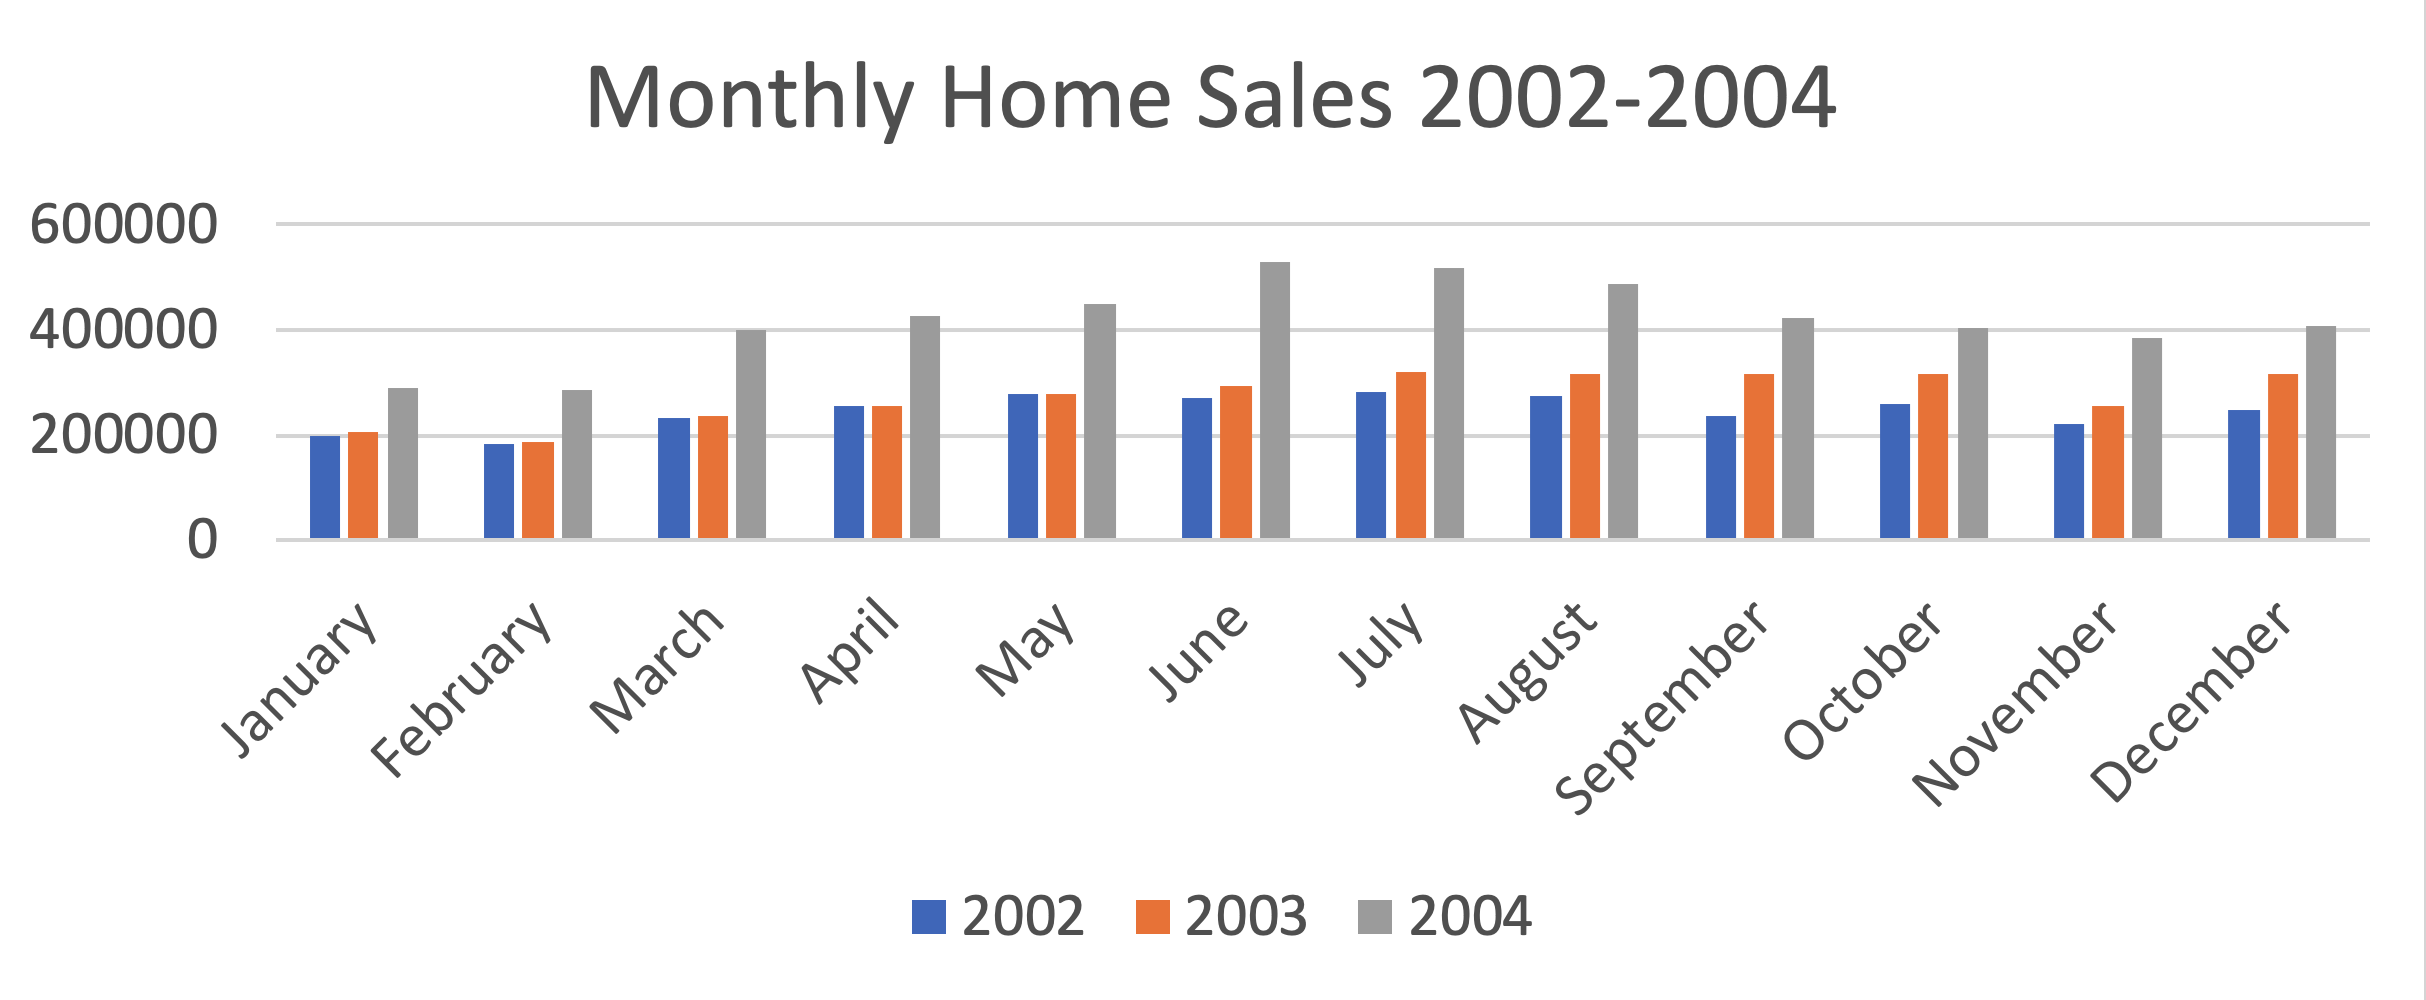 mthly home sales 2002-2004